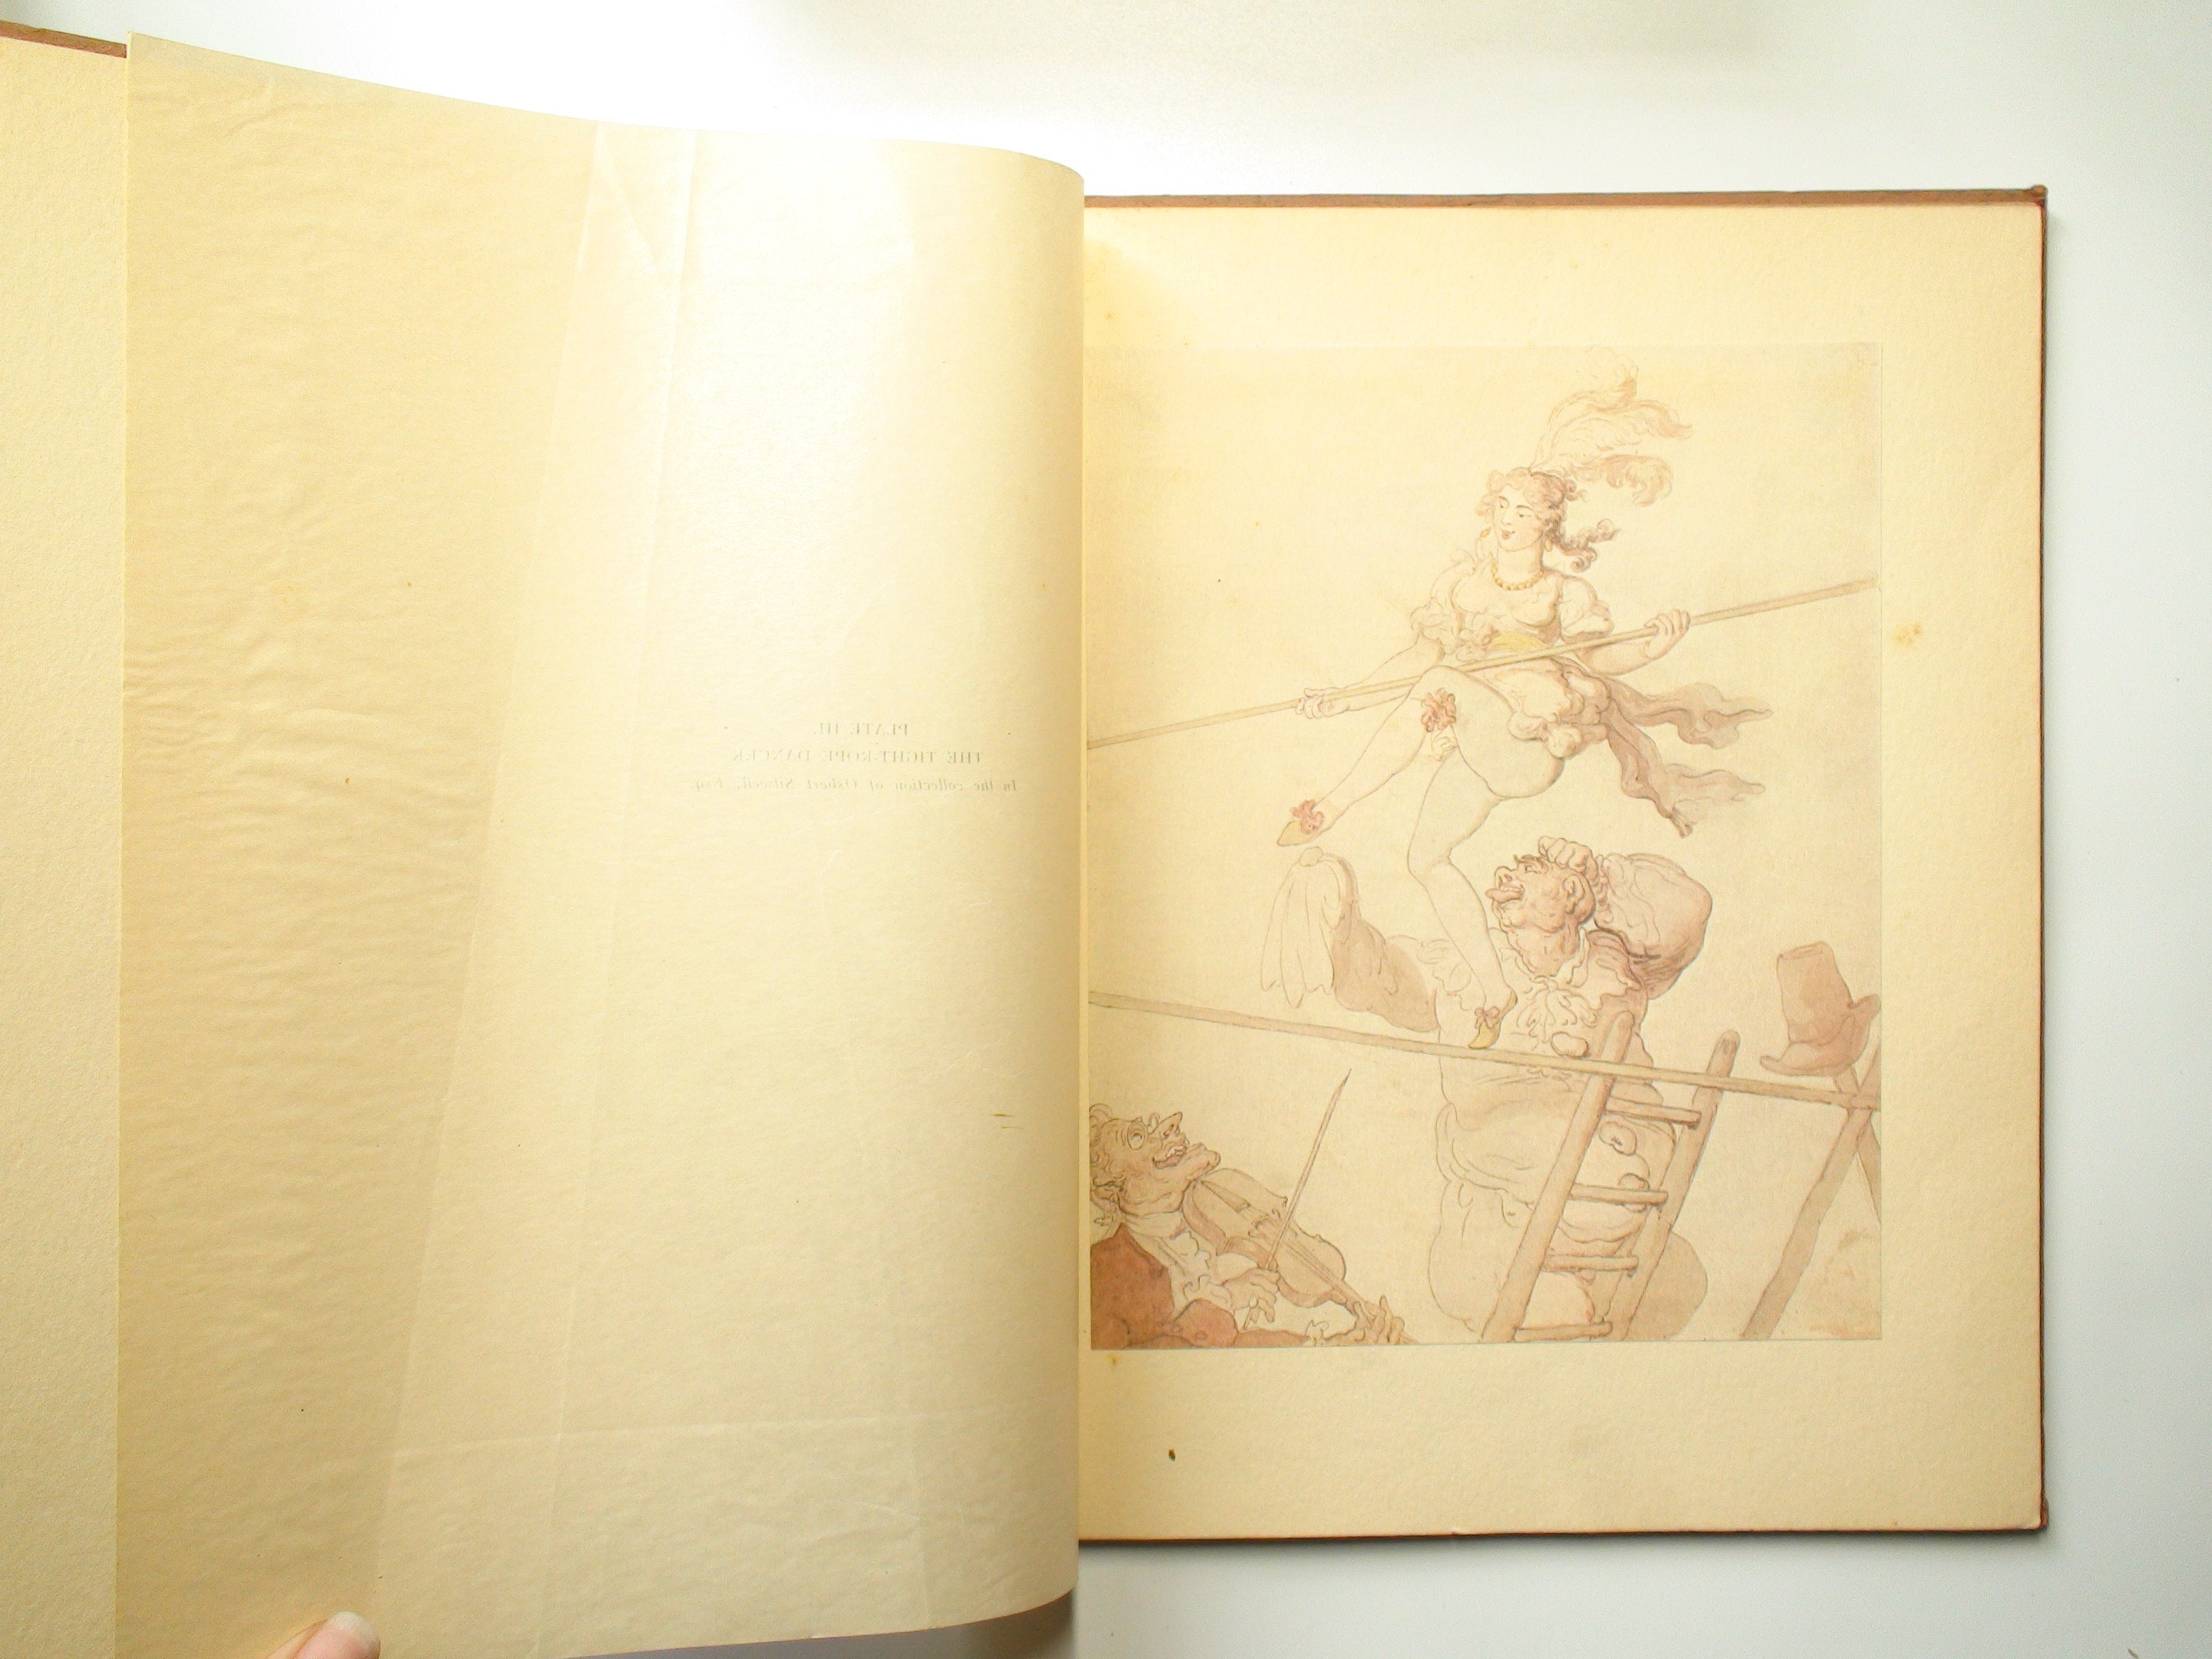 Famous Water-Colour Painters, Thomas Rowlandson, Illustrated, 1st Ed, 1929